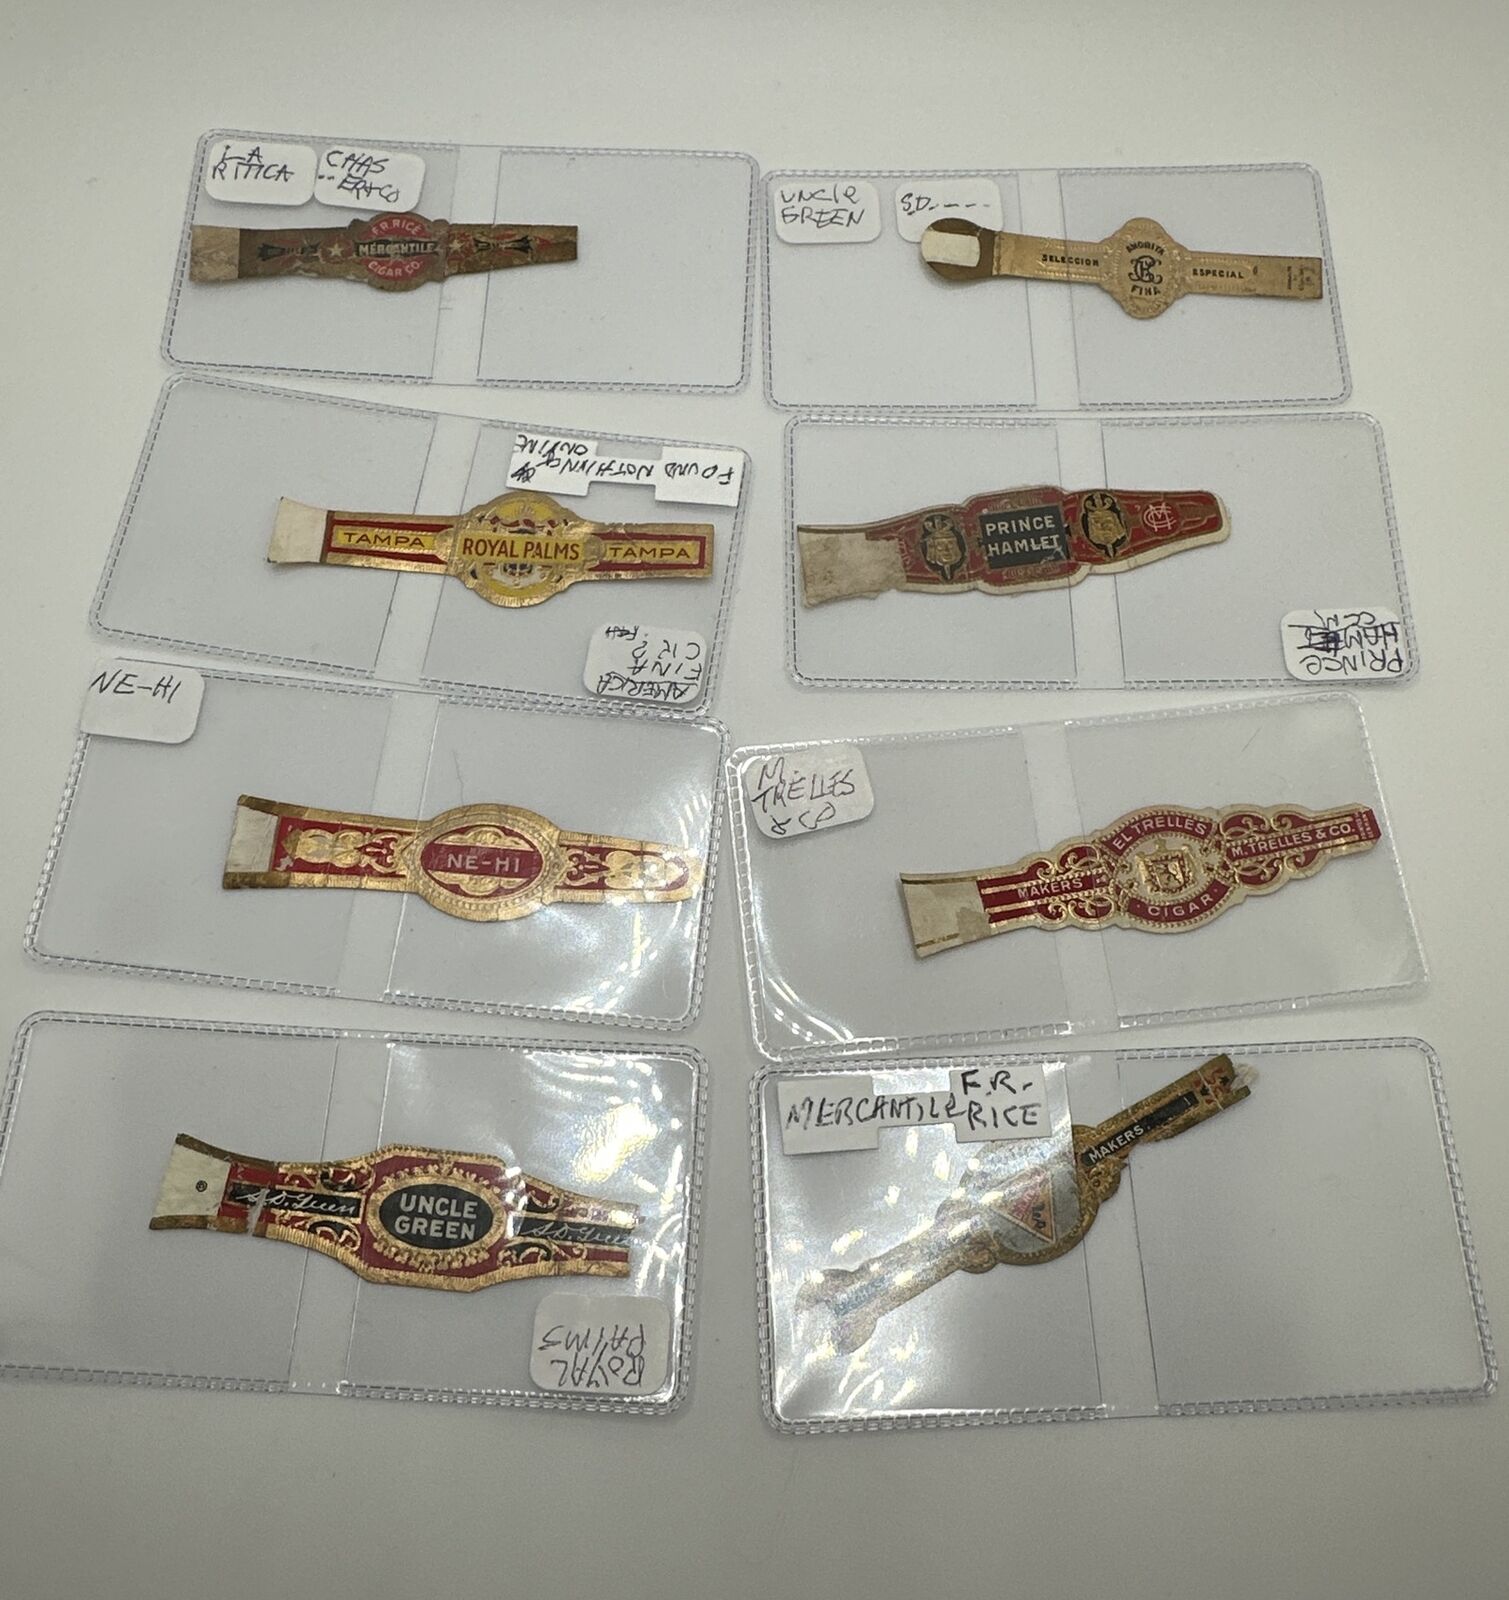 8 Rare Embossed Antique Paper Cigar Bands Gold Foil Identified And Labeled